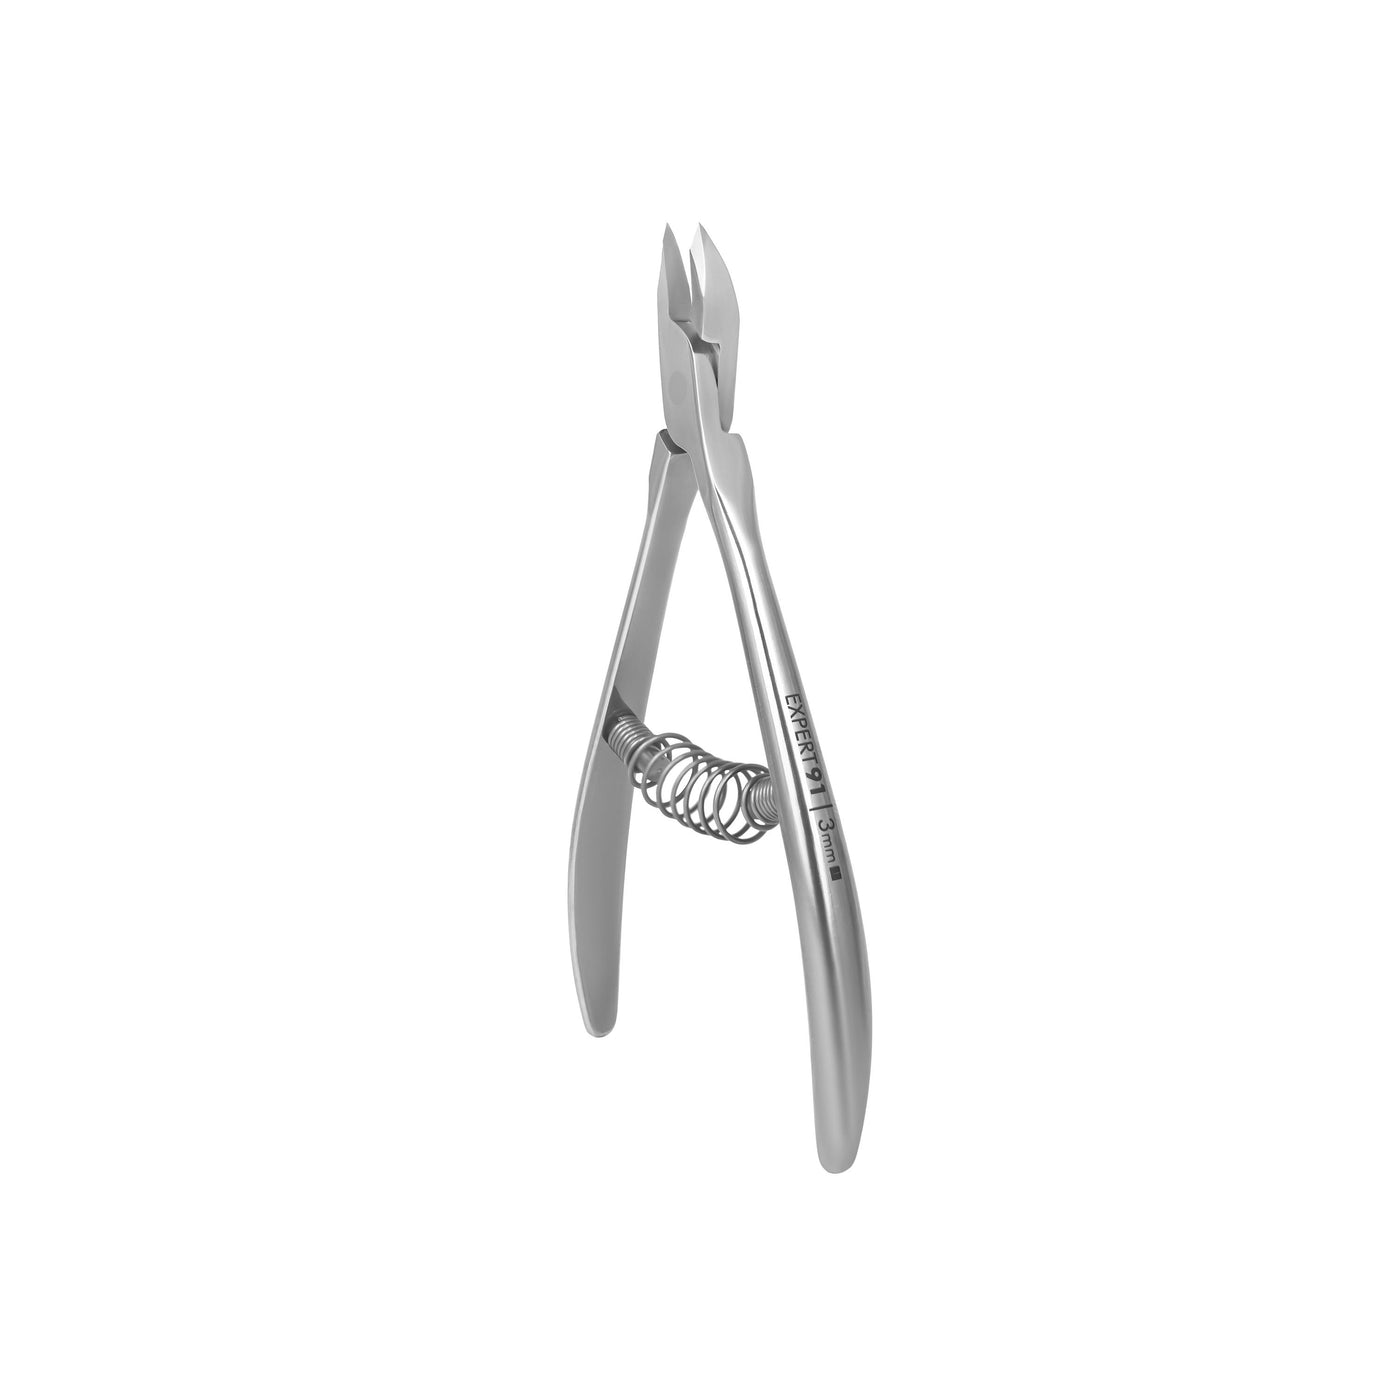 EXPERT 91 | 3 mm - Cuticle Nippers